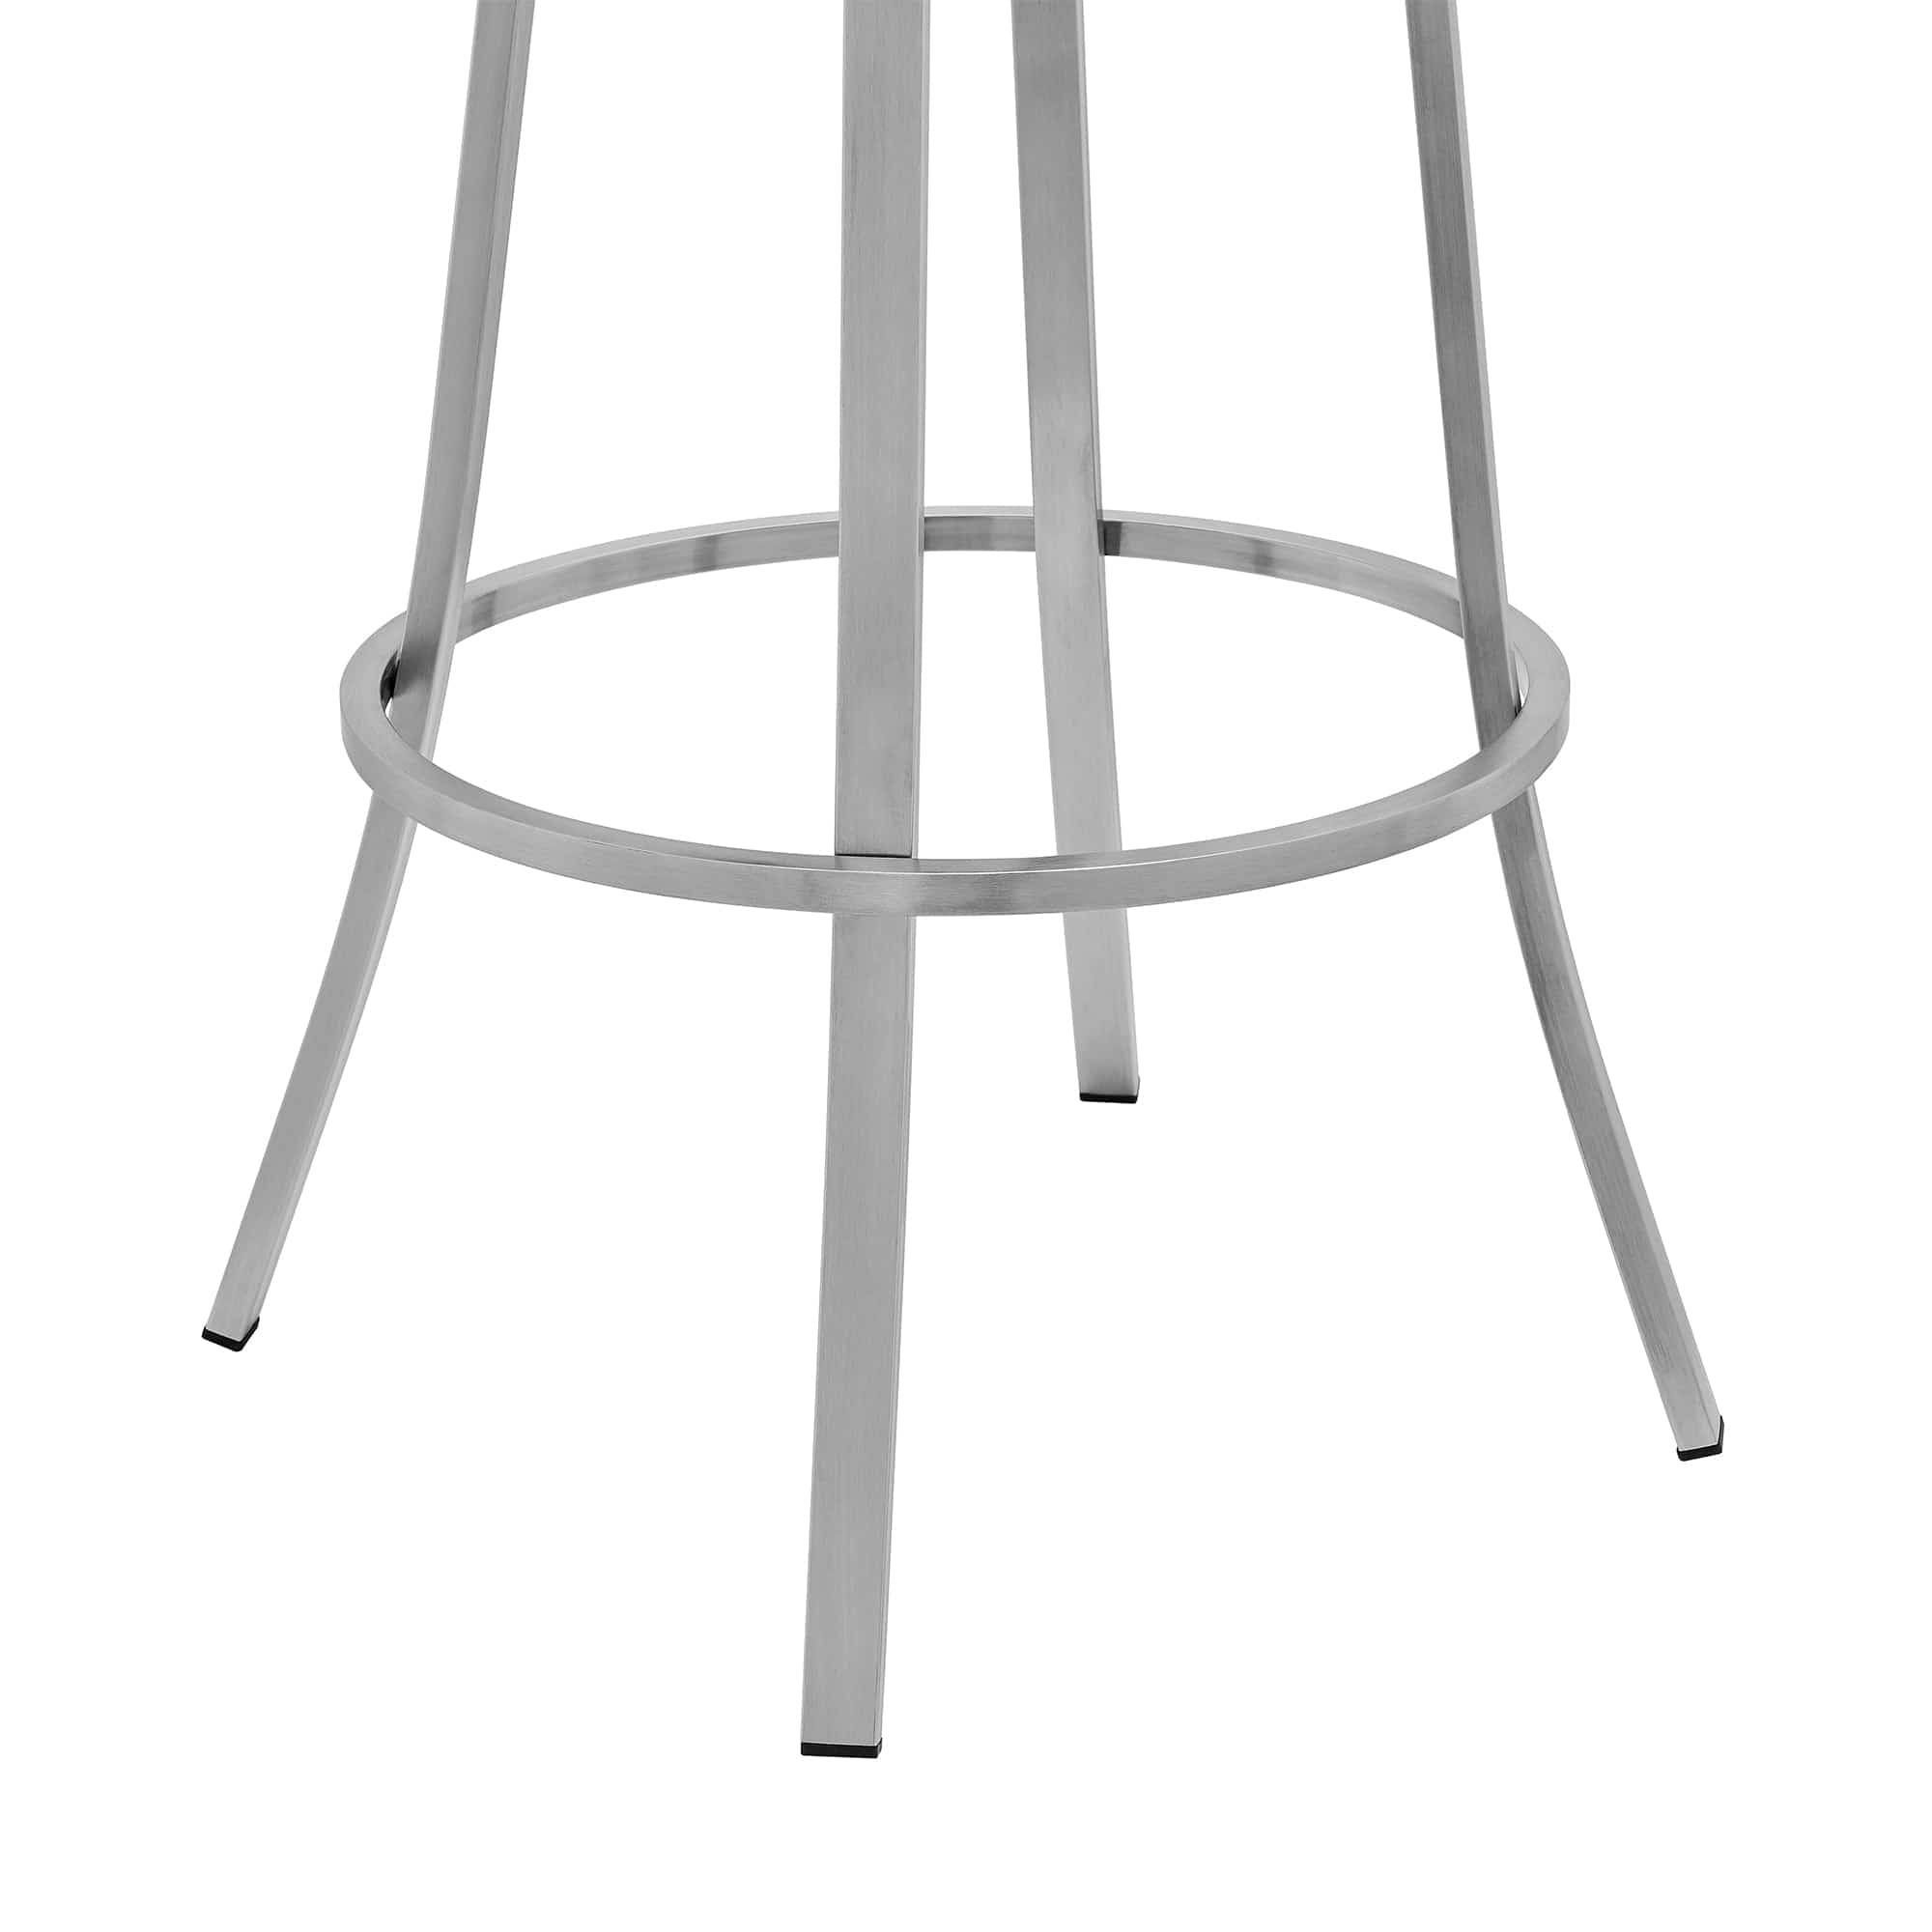 Armen Living Barstool Armen Living | Palmdale Swivel Modern Faux Leather Bar and Counter Stool in Brushed Stainless Steel Finish | 721535752188